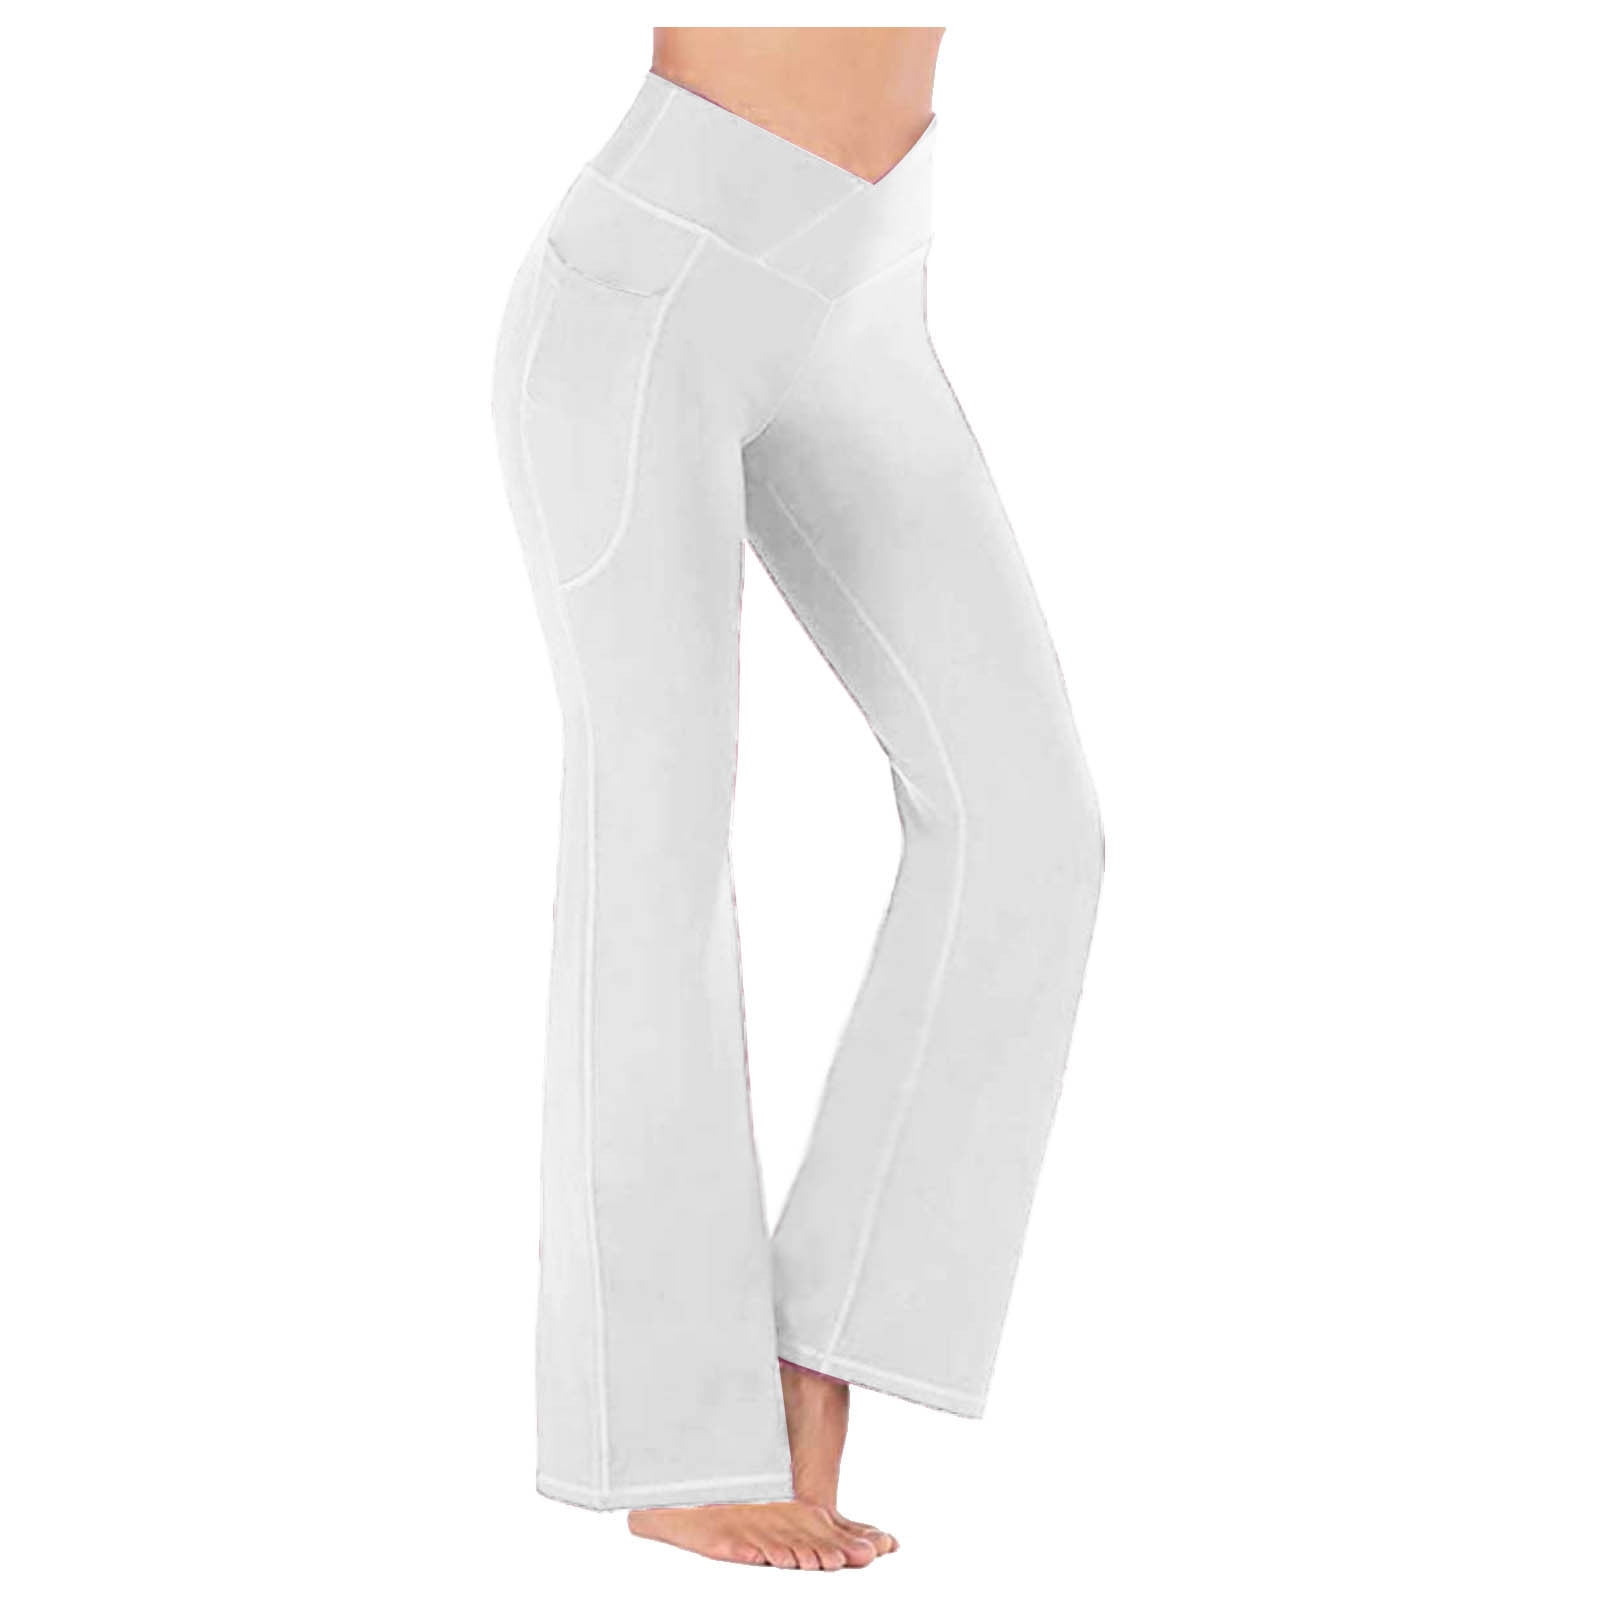 XFLWAM Flare Leggings for Women Crossover High Waisted Yoga Pants Casual  Bootcut Workout Bell Bottom Leggings with Pockets White S 